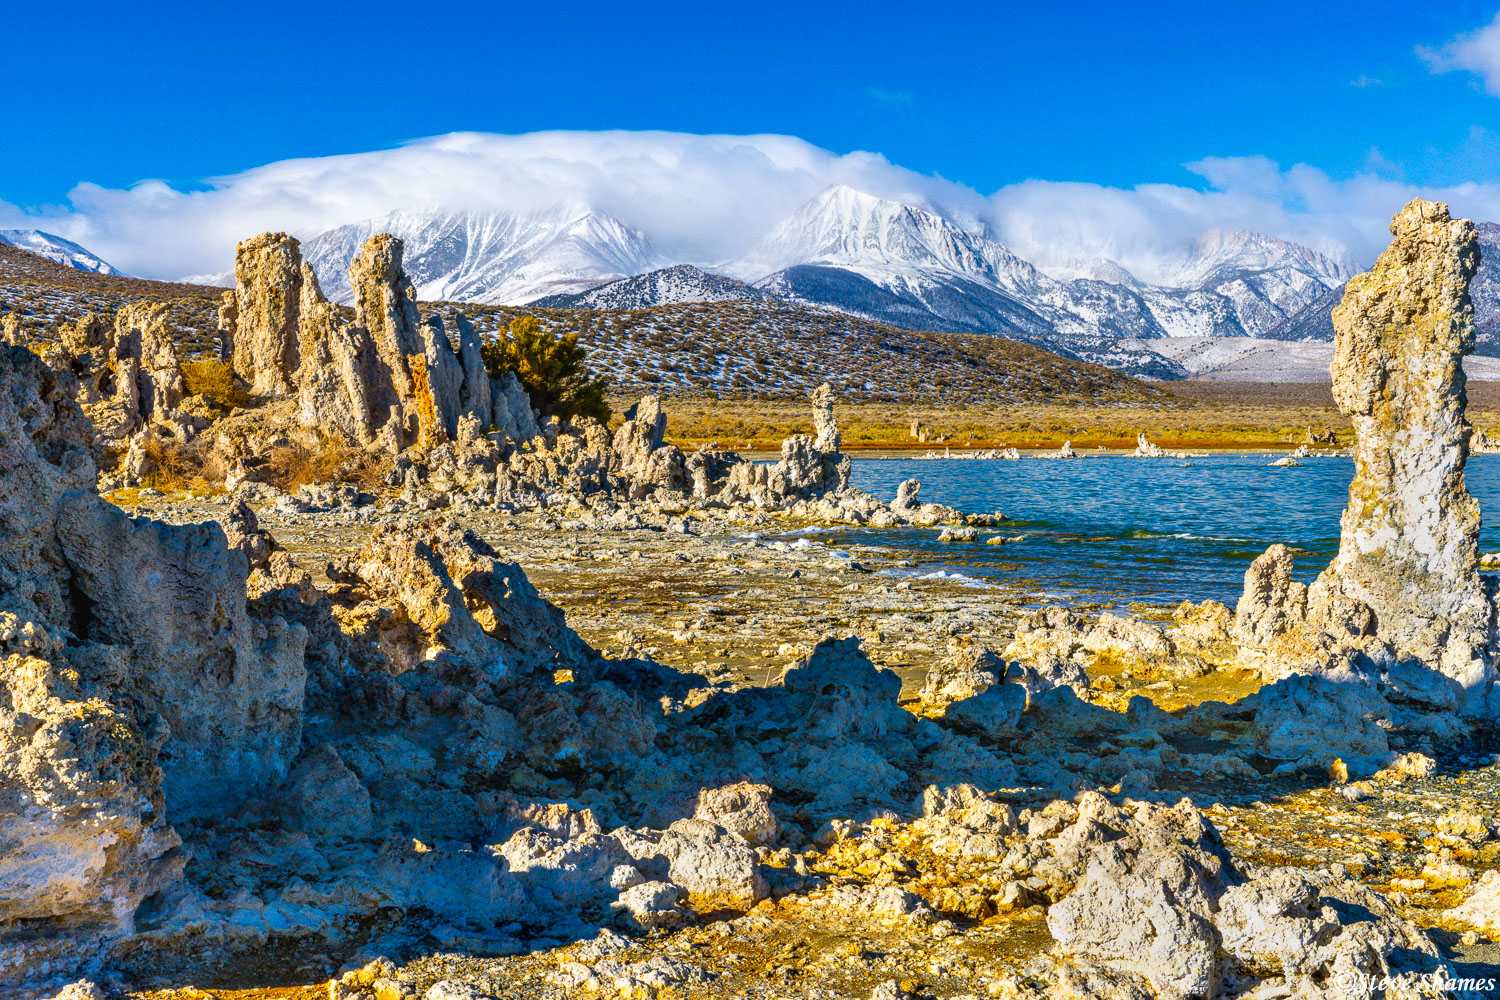 The snow and cloud covered mountains really added to this scene at Mono lake.